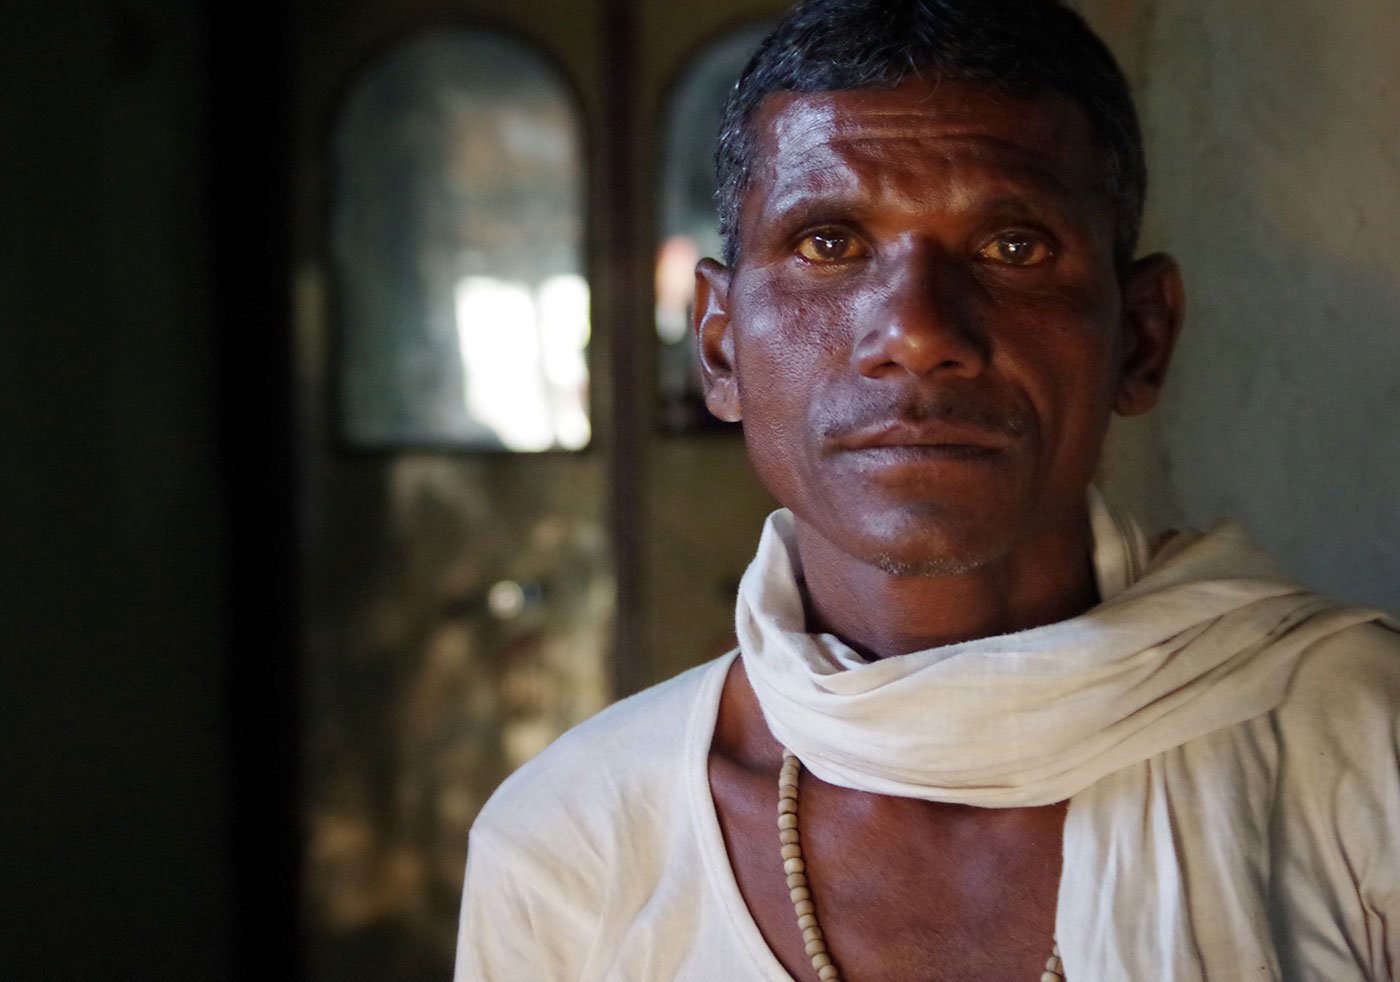 Vishwanath Khule, a marginal farmer, lost his entire crop during the drought year. His son, Vishla Khule, consumed a bottle of weedicide that Vishwanath had bought